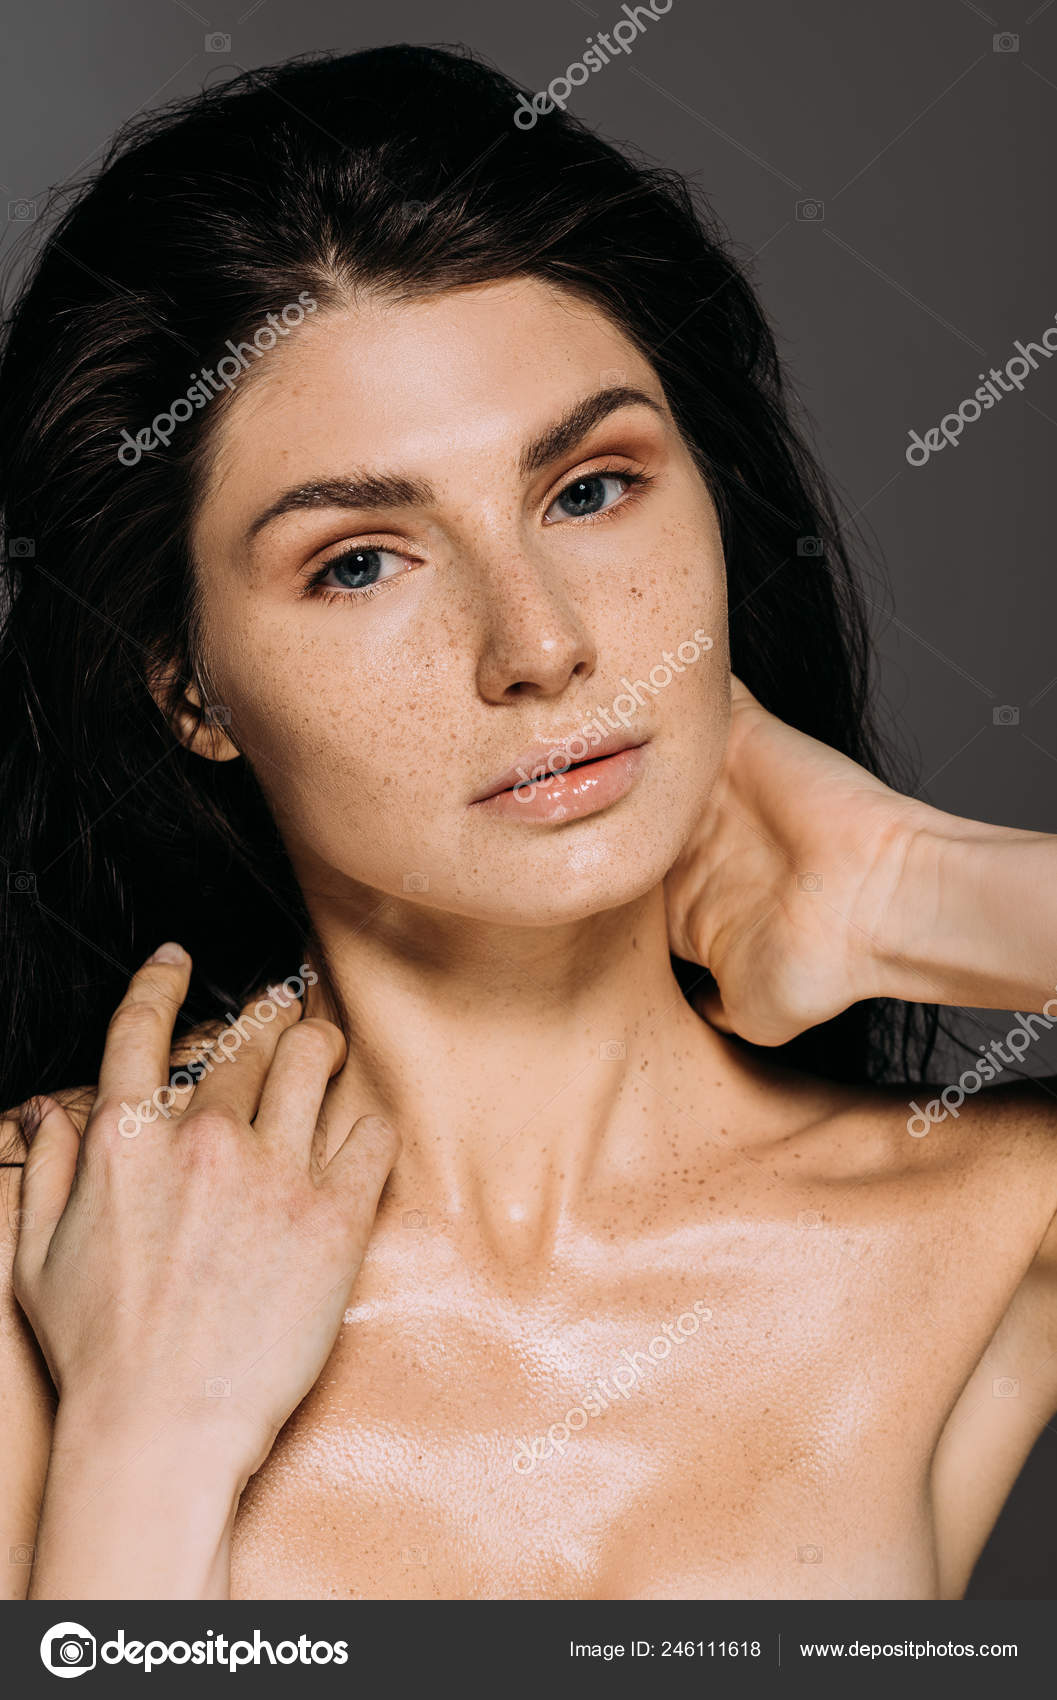 Naked Women With Freckles